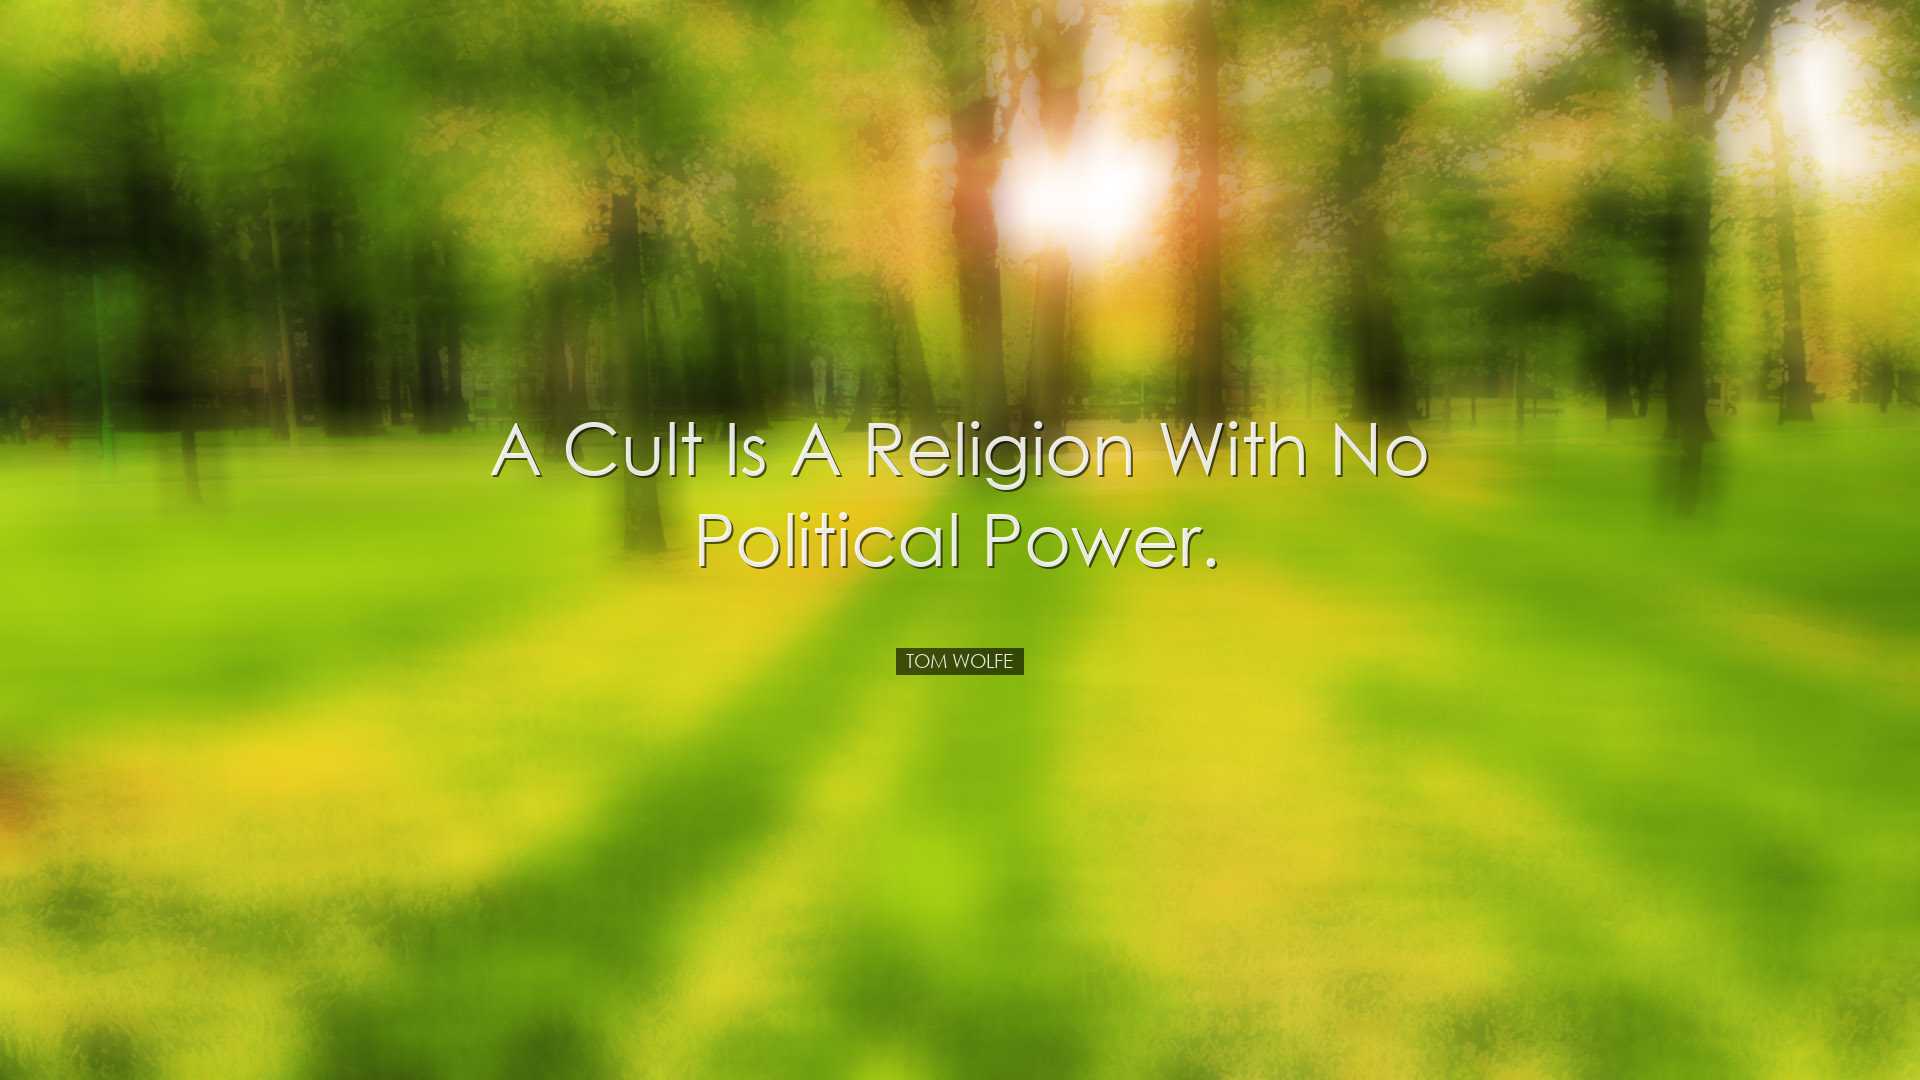 A cult is a religion with no political power. - Tom Wolfe